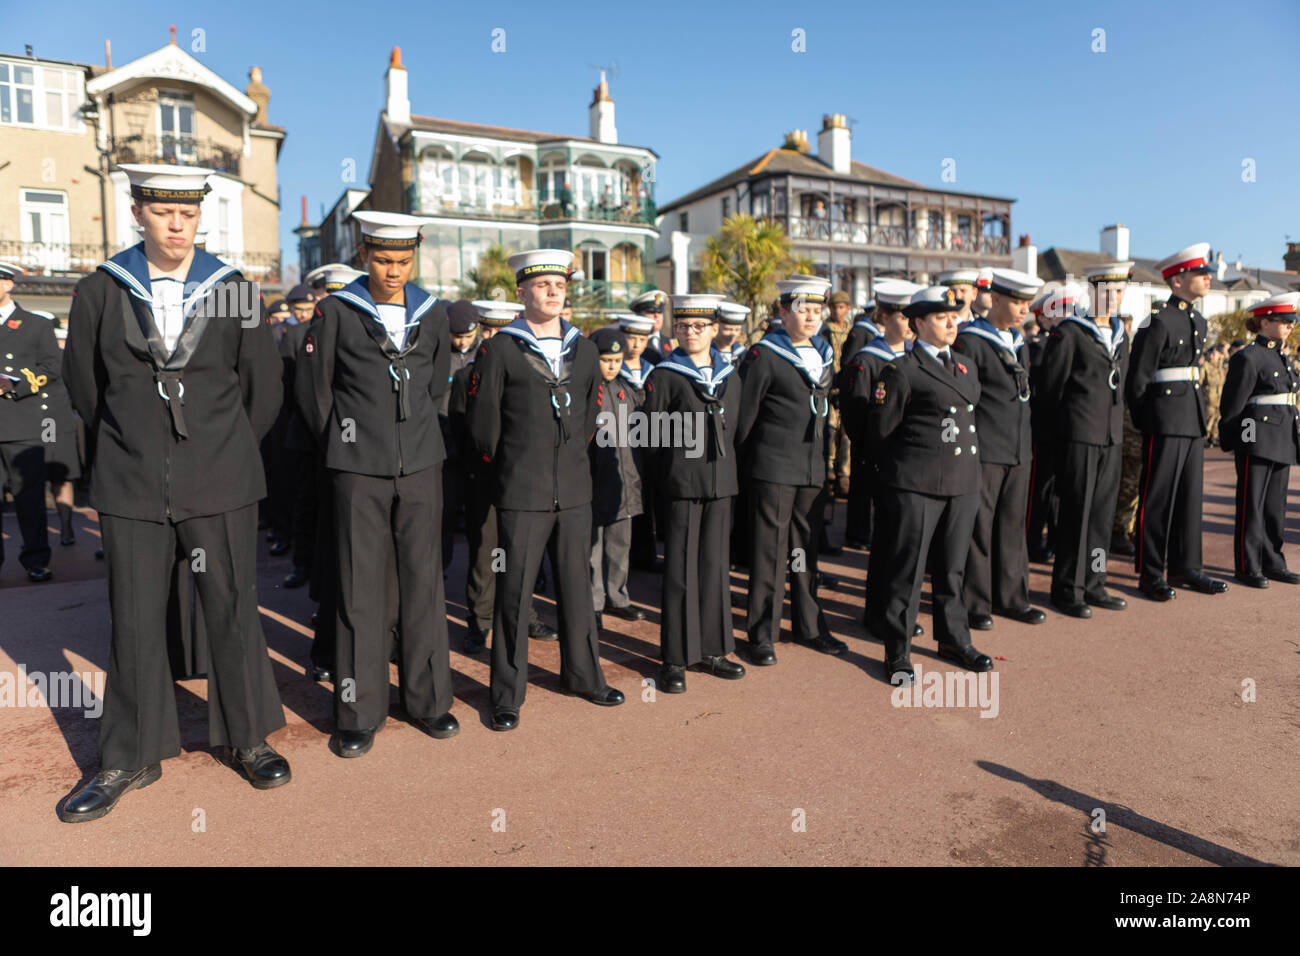 Southend on Sea, UK. 10th Nov, 2019. Remembrance Day Service at the Southend Cenotaph, Clifftown Parade, in front of the Lutyens designed war memorial. The service is attended by local dignitaries, including the Mayor Southend and both local MPs, Sir David Amess and James Dudderidge. Penelope Barritt/Alamy Live News Stock Photo